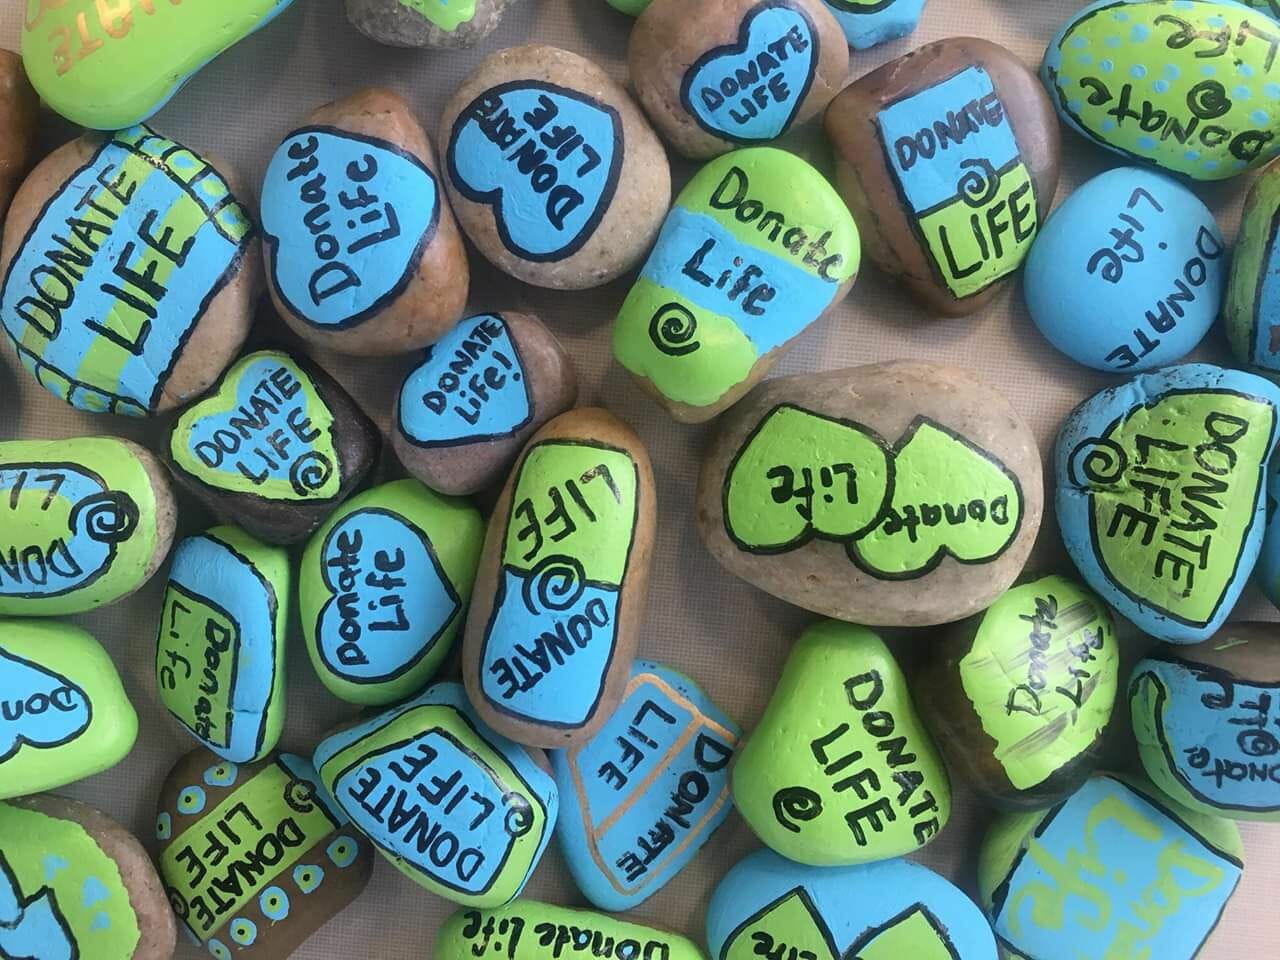 Rocks painted with Donate Life brand blue and green colors